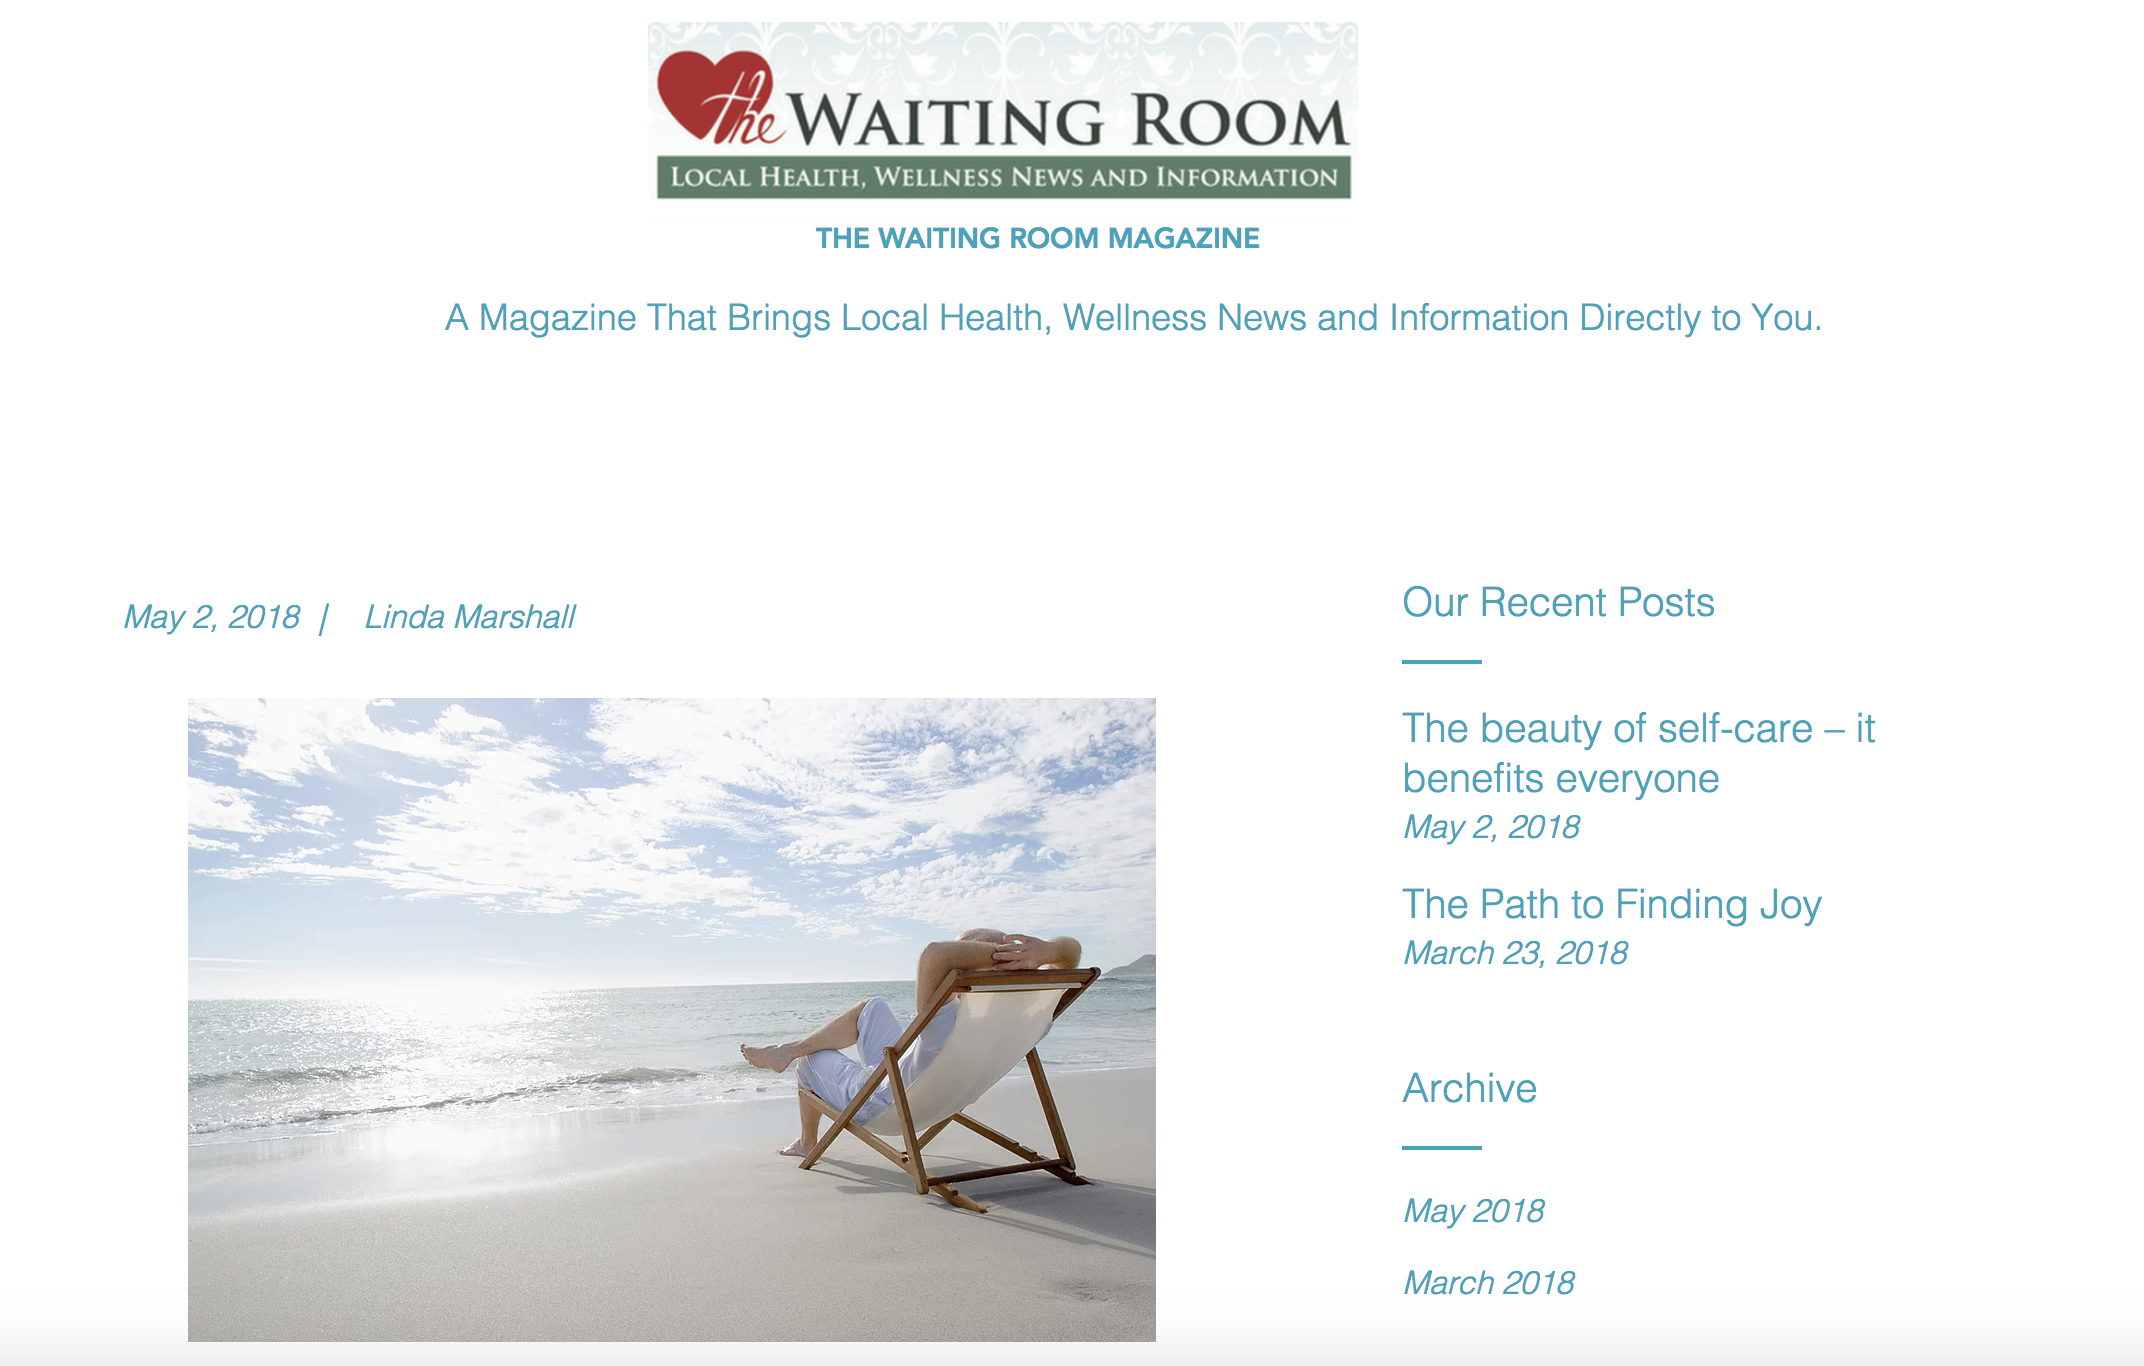 The Beauty of self-care - it benefits everyone, published in The Waiting Room 